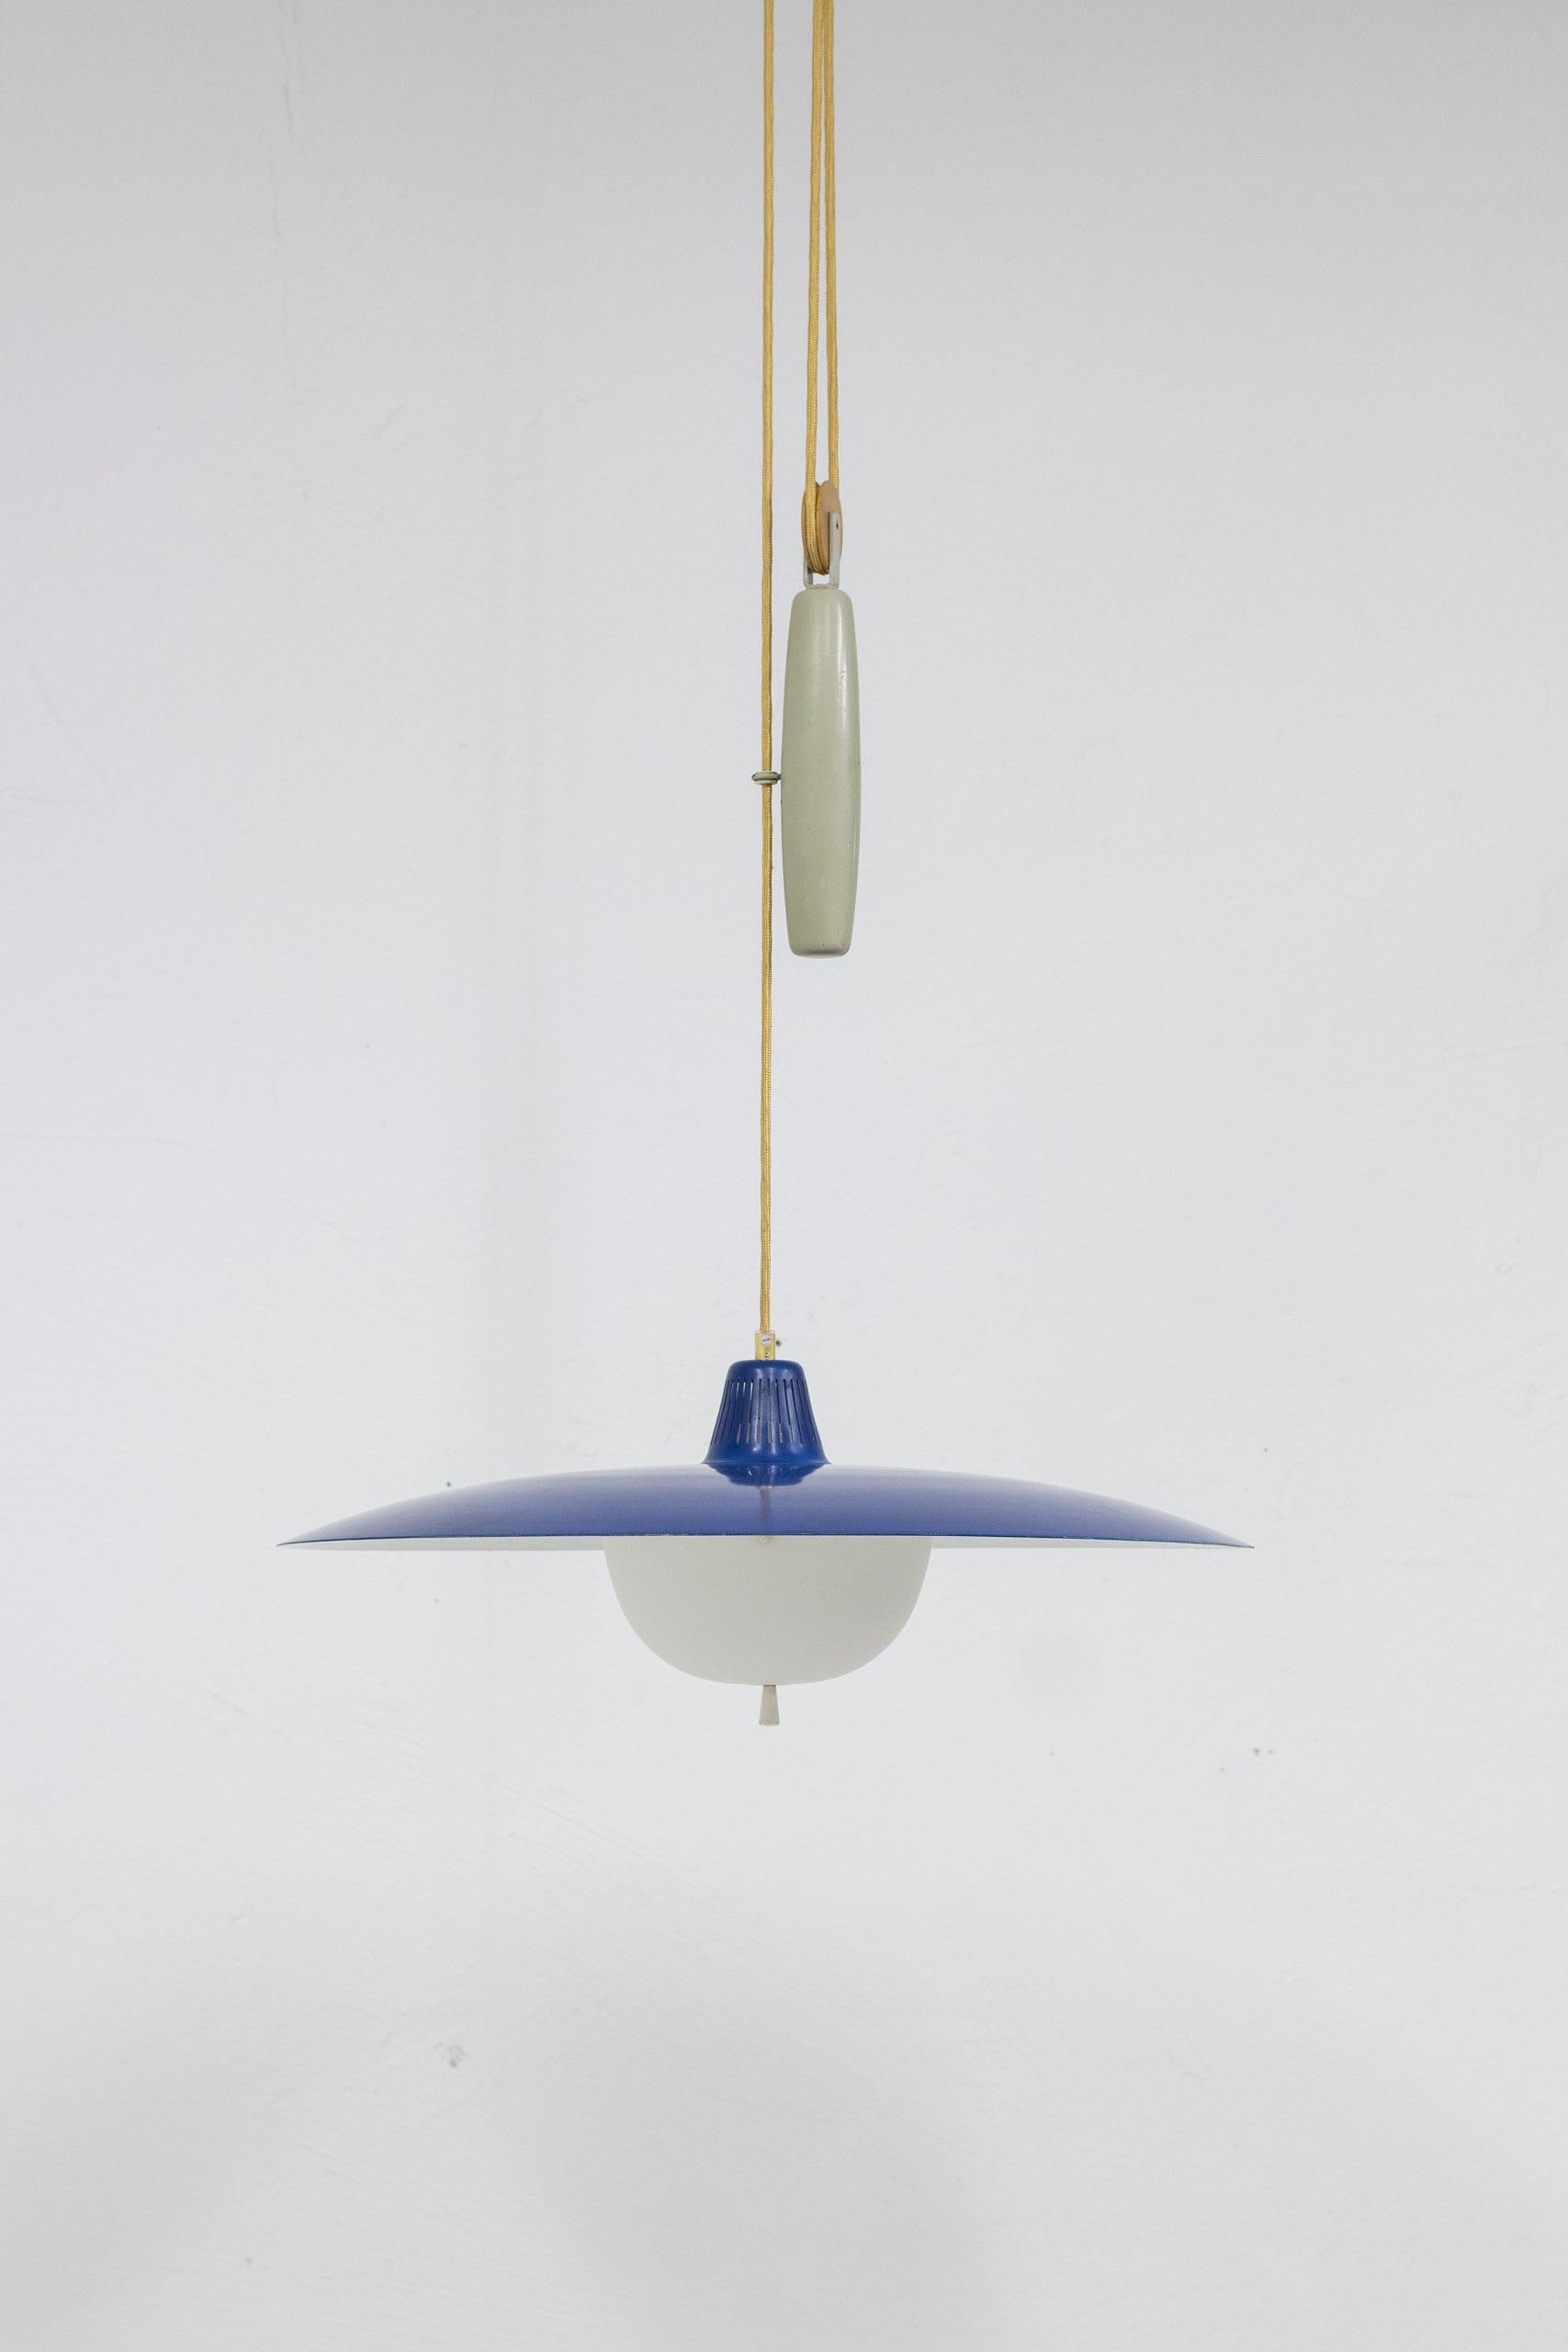 Ceiling lamp model T-6H designed by Alf Svensson. Produced in Sweden by Bergboms during the 1950s. Large lamp shade in blue and white lacquered aluminum with brass details and original opal glass shade. Ceiling cup and counter weight in grey